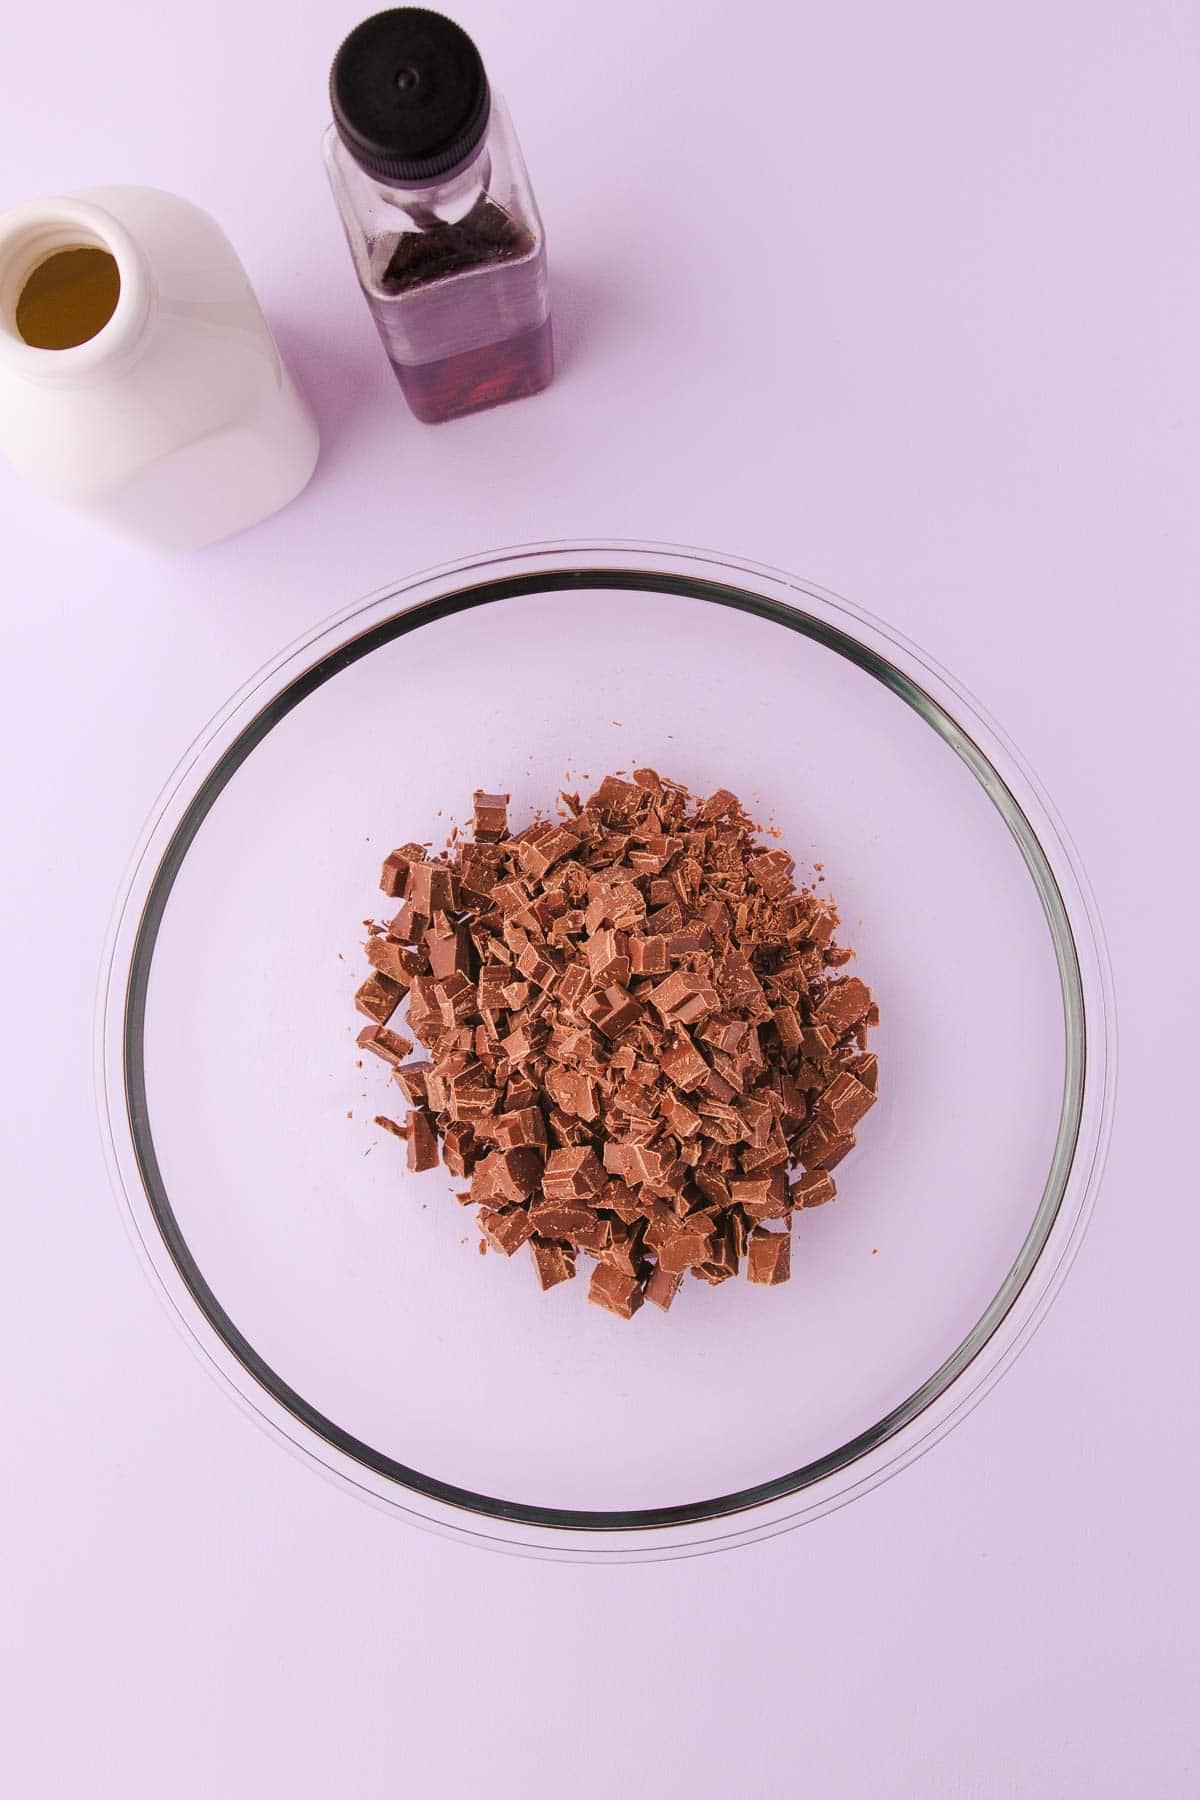 Chopped milk chocolate in a large glass bowl on a pale purple background.